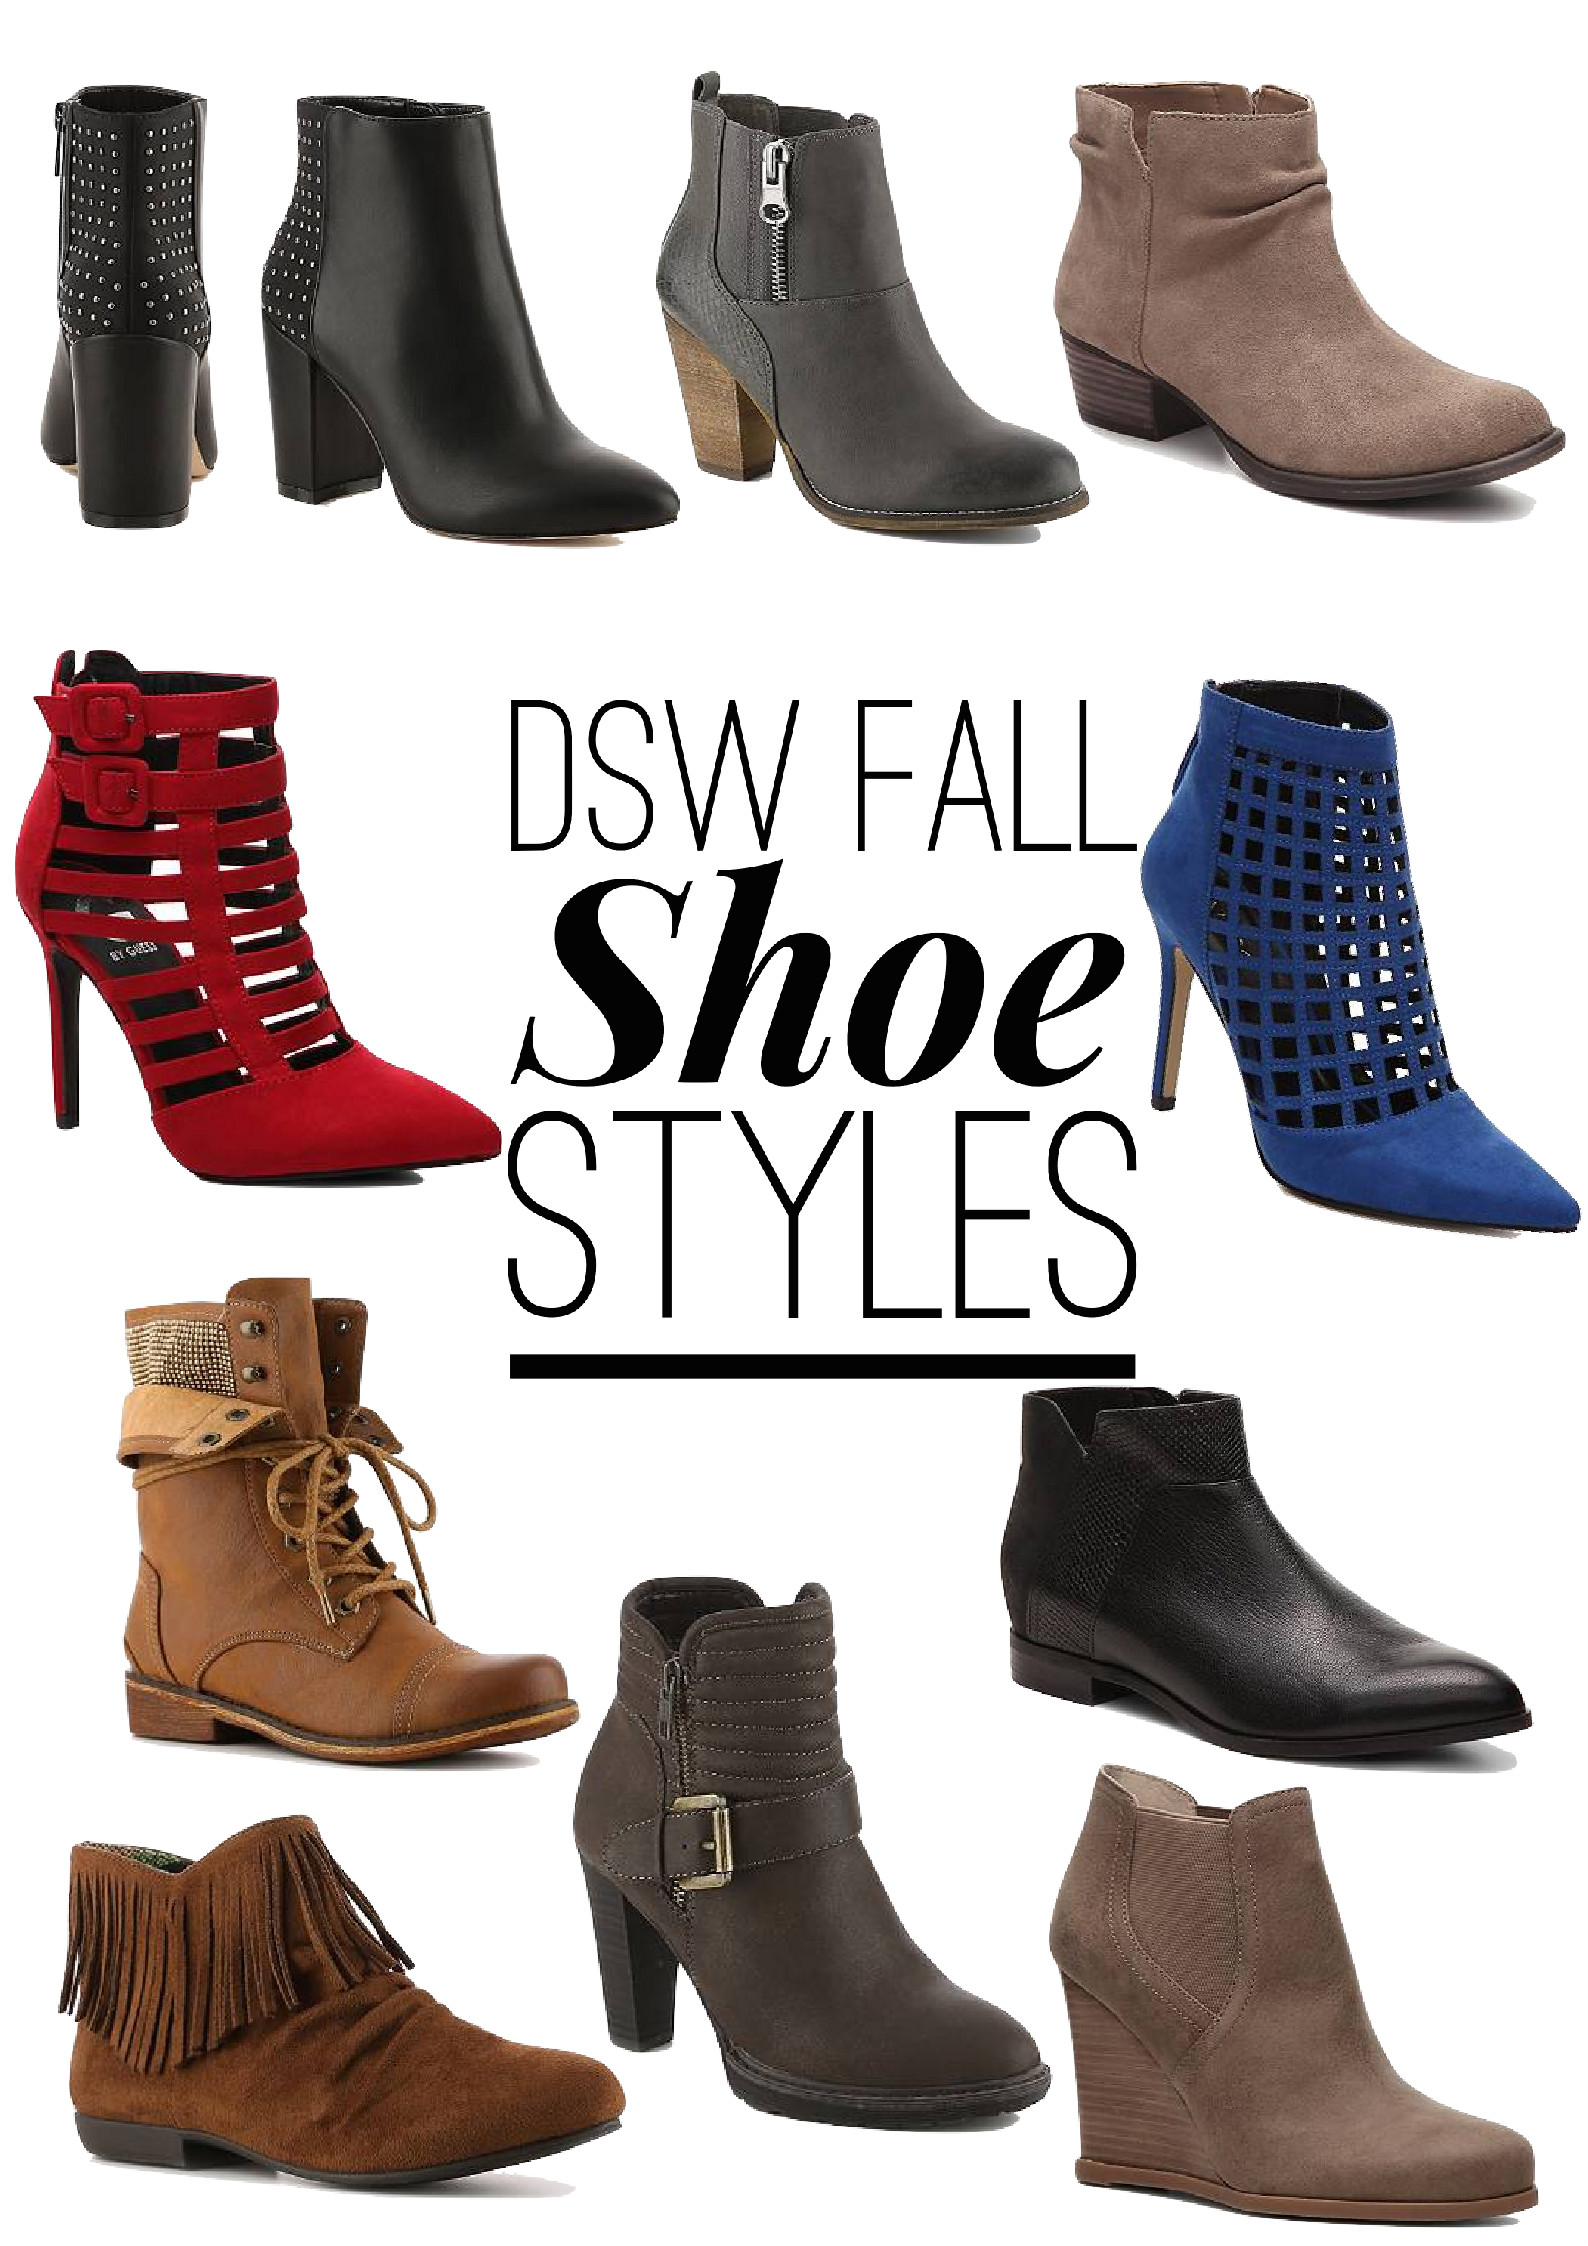 dsw chattanooga hours